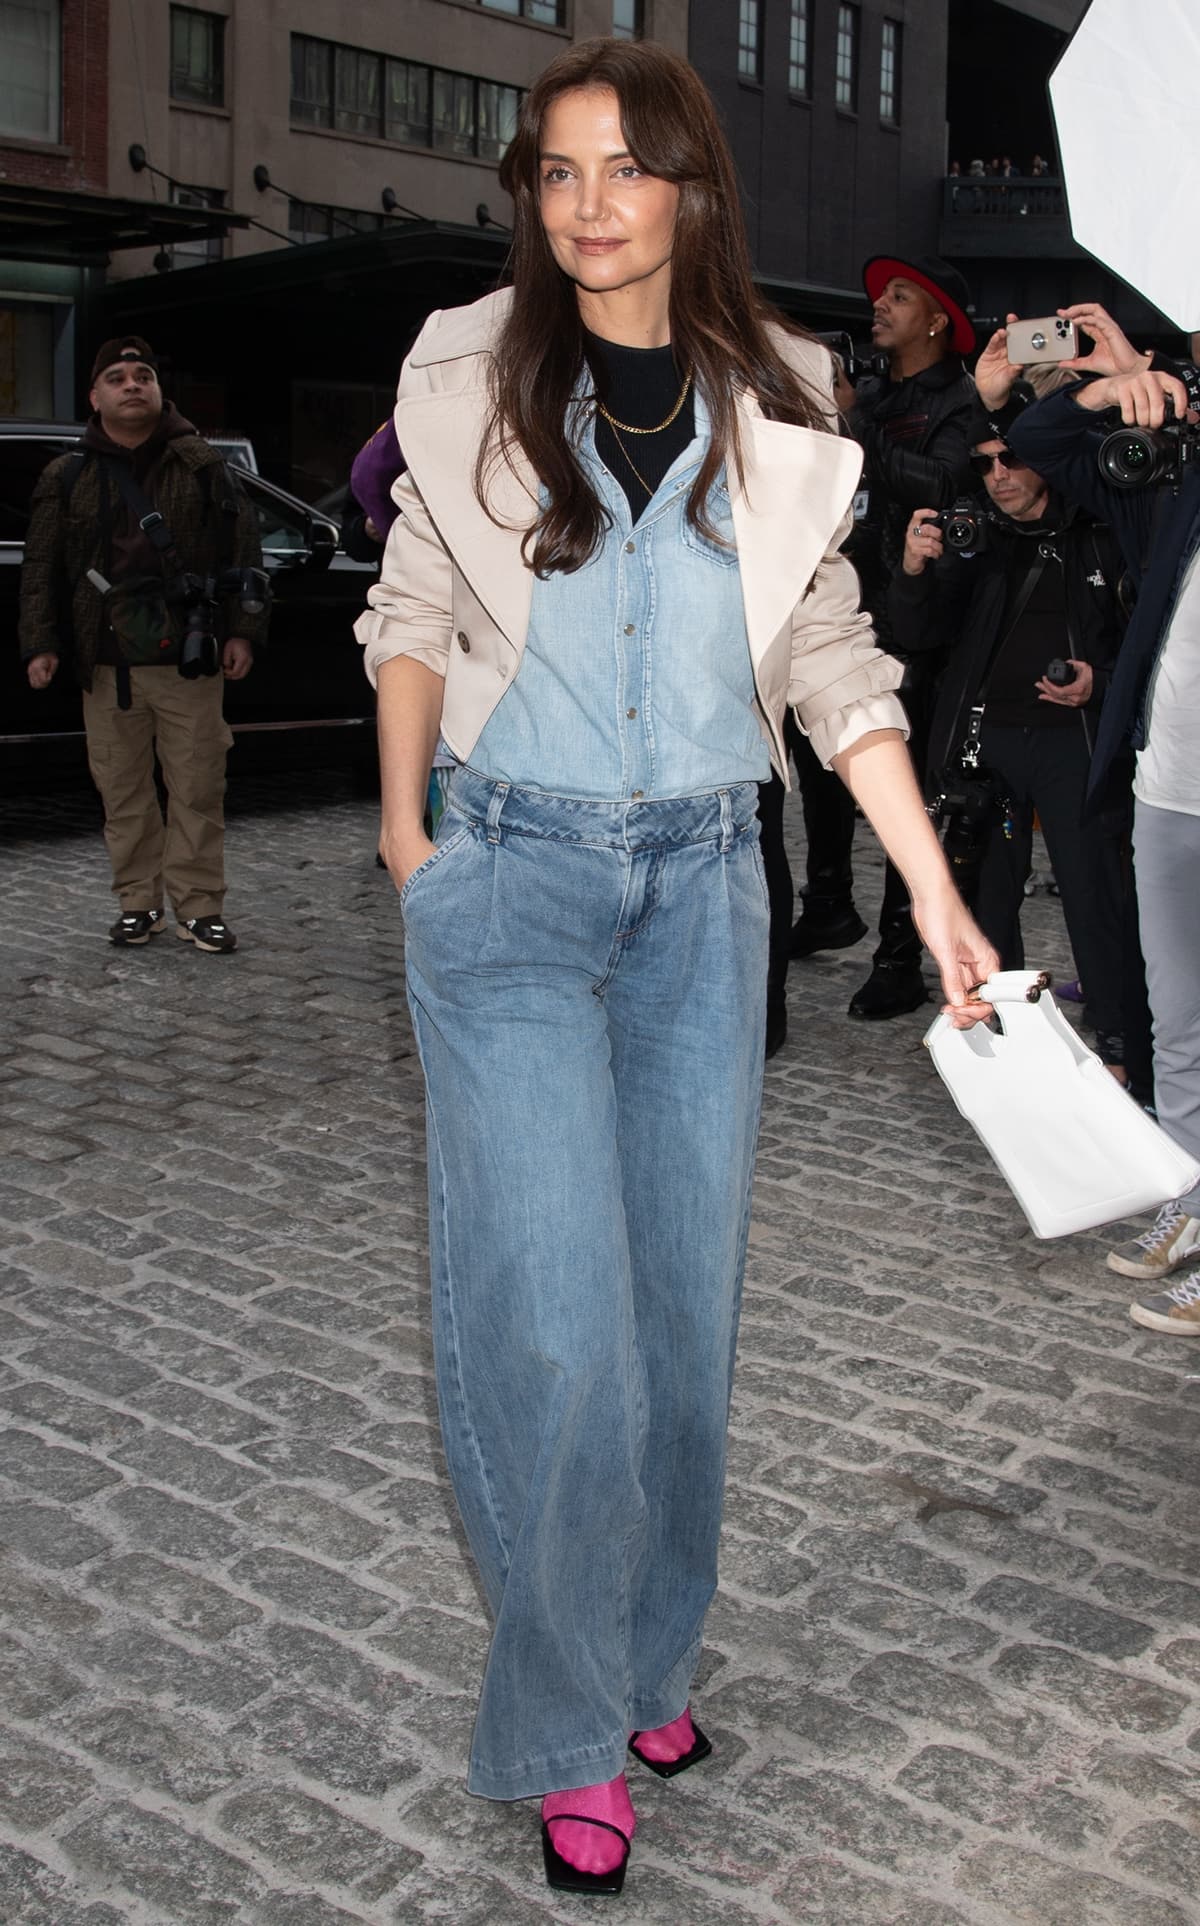 Katie Holmes showcases her flair for unconventional fashion with a double denim look and colorful accessories at Chelsea’s Highline Stages event